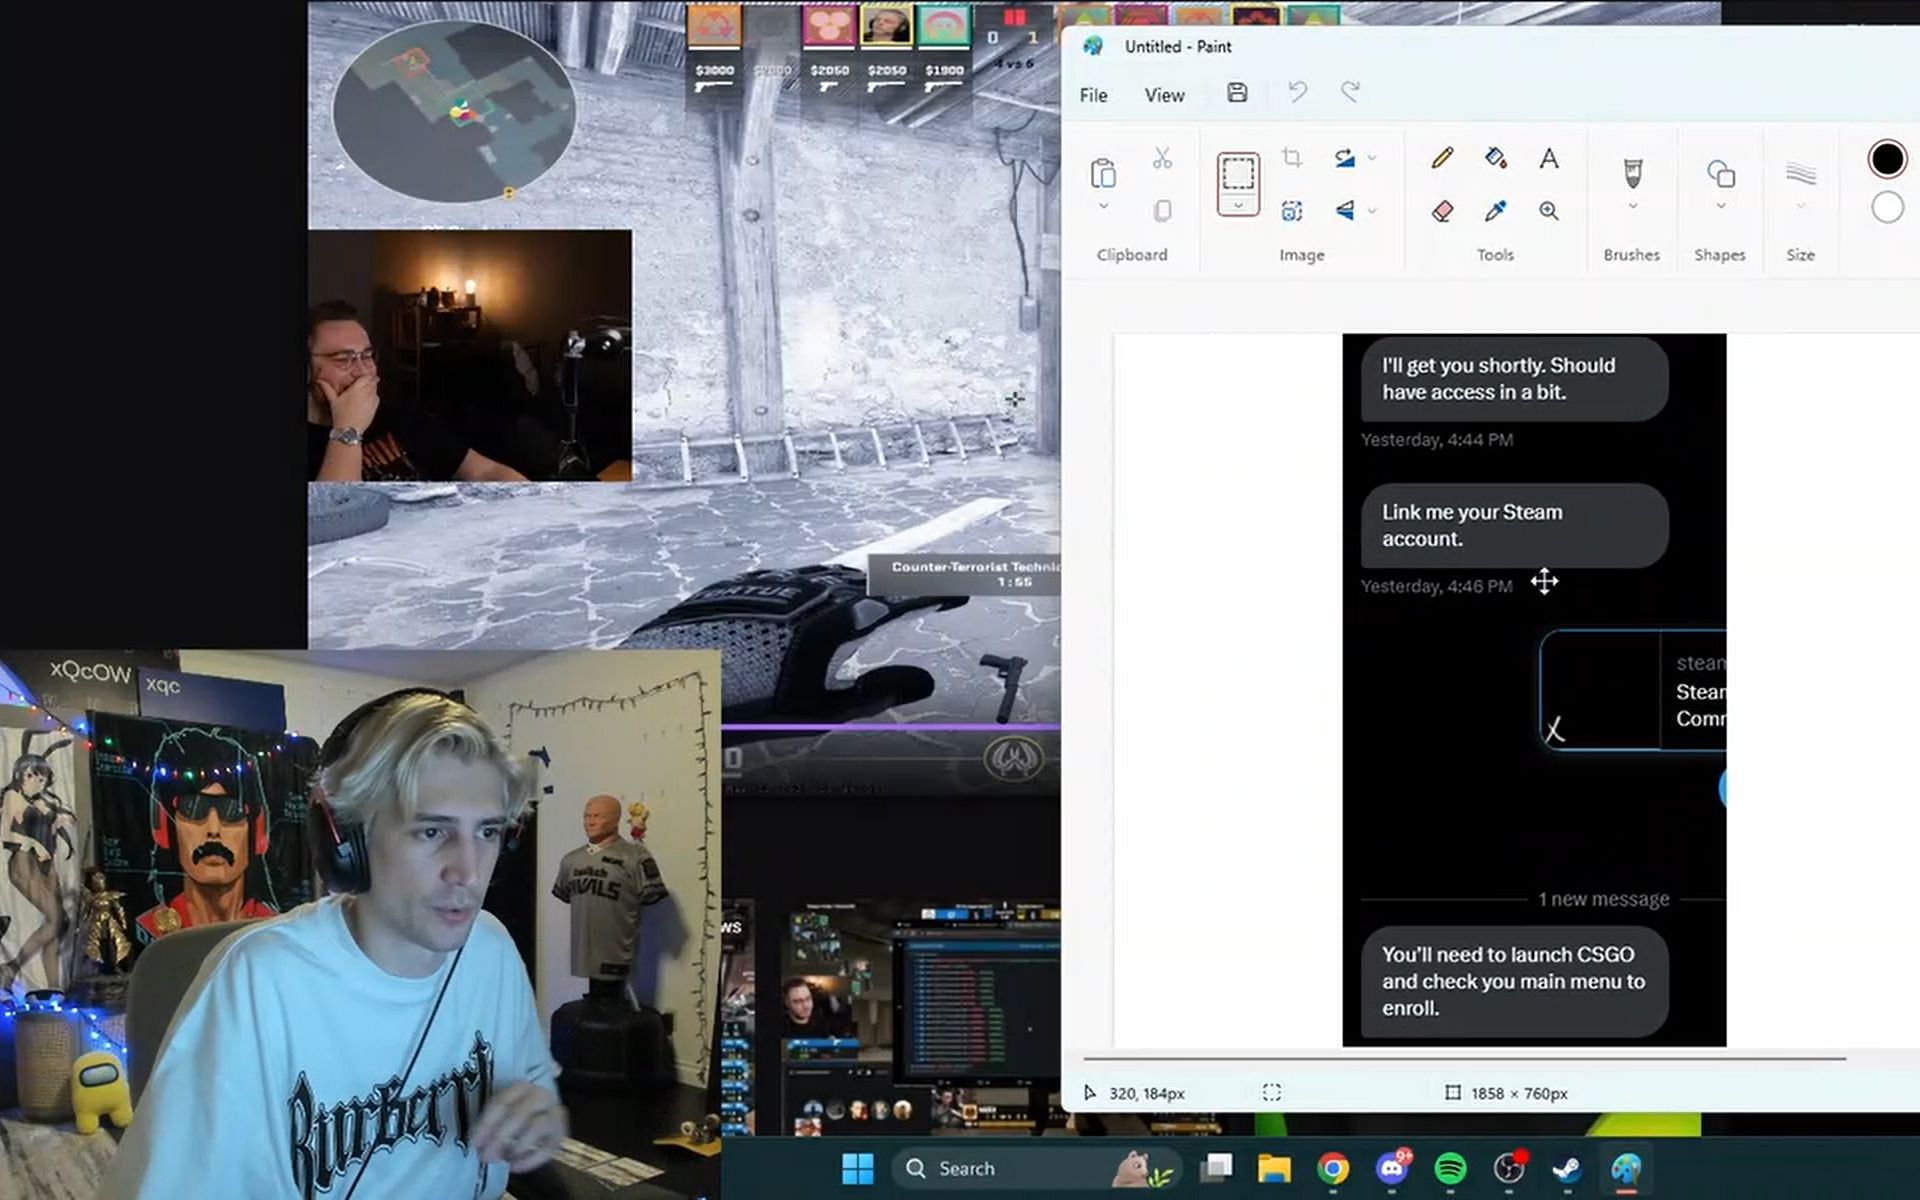 The streamer shows the screenshot of the conversation he had with Counter-Stike 2 off-stream (Image via Twitch)